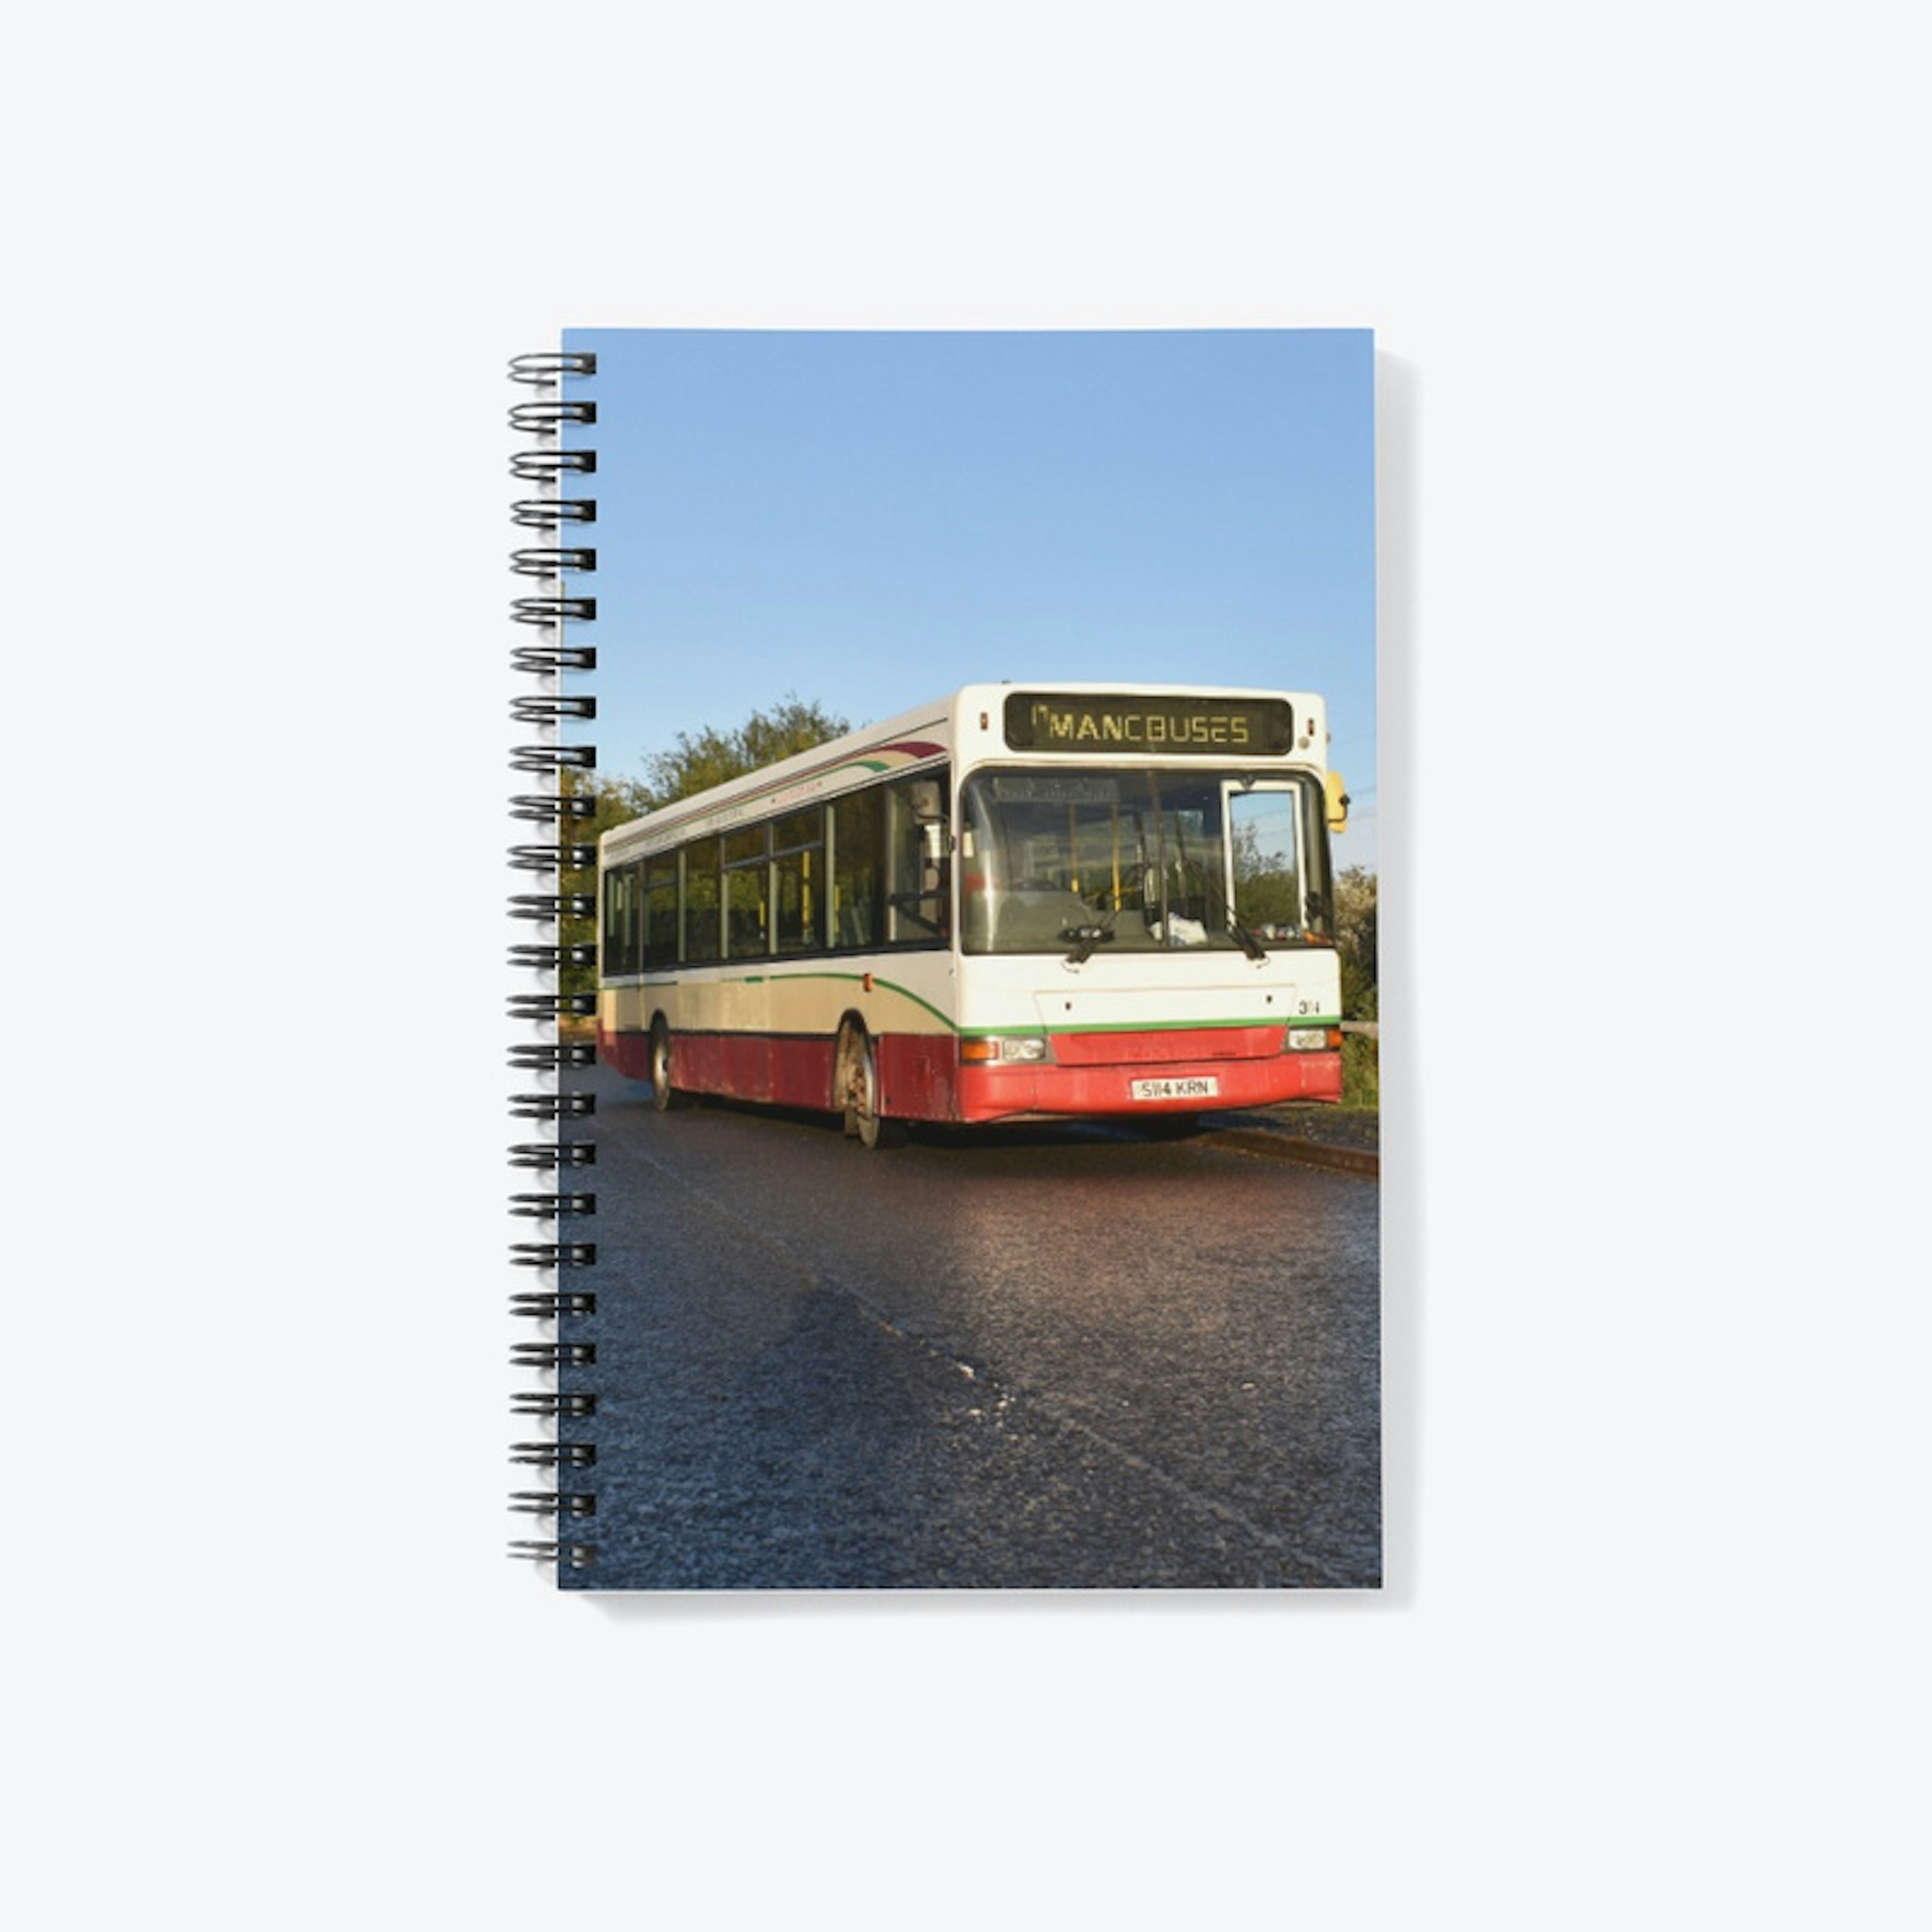 Mancbuses Project 114 Notebook